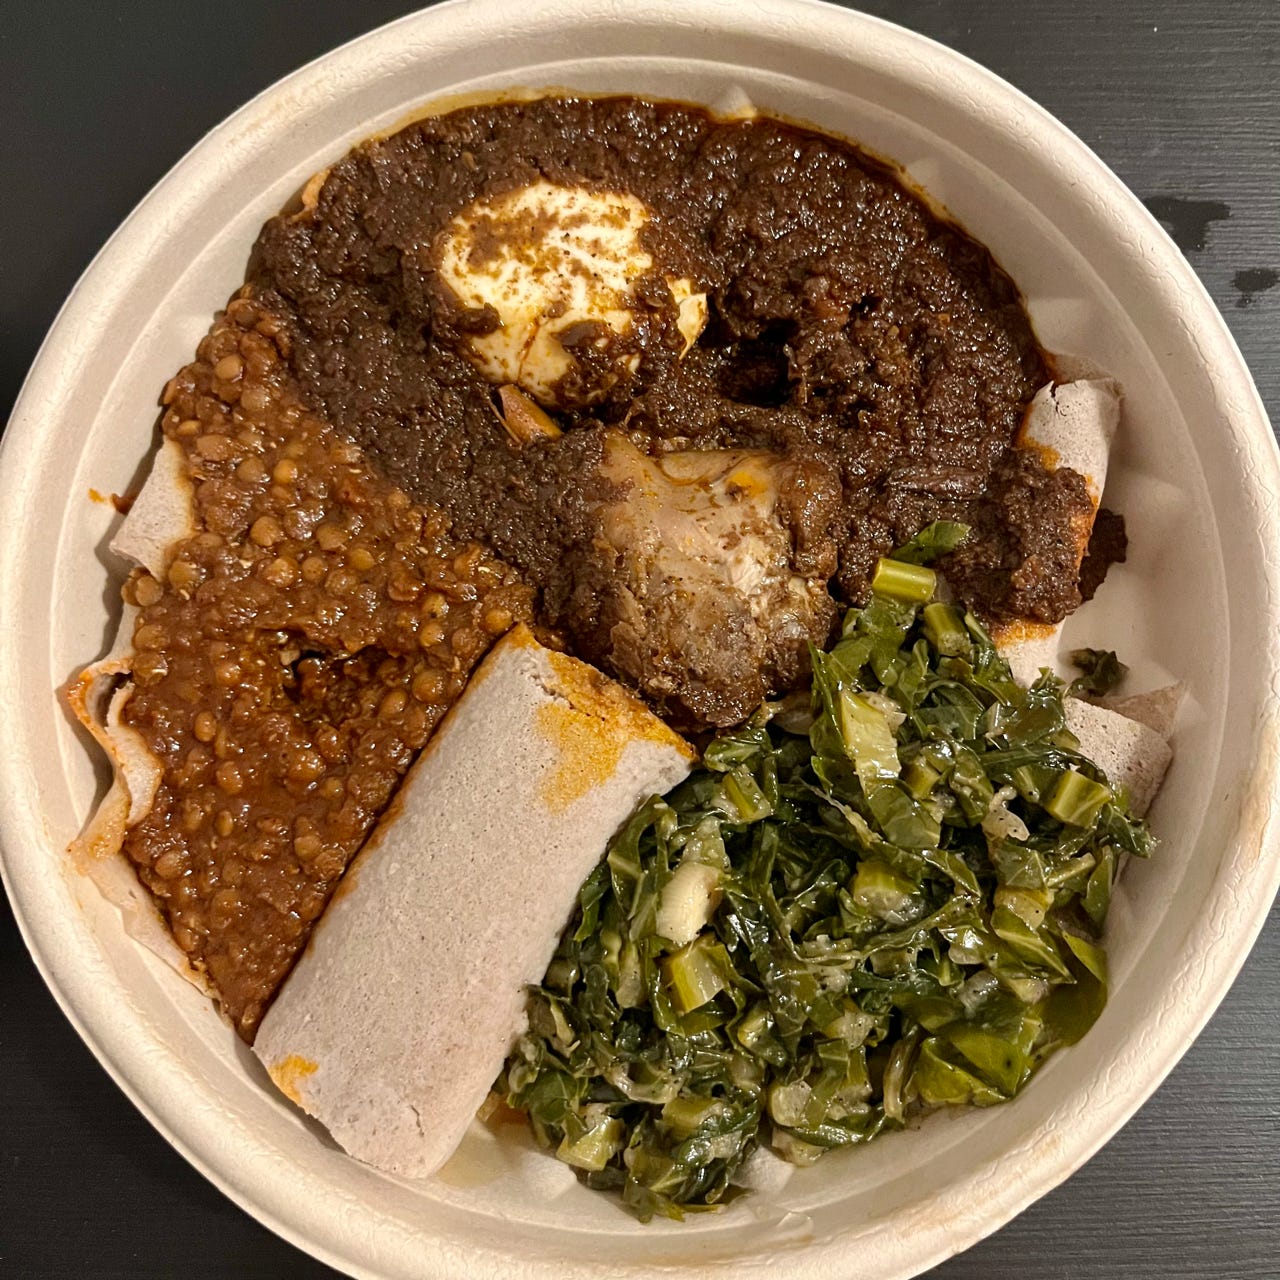 A bowl of rolled up injera, red lentils, green collard greens, and a brown chicken stew.